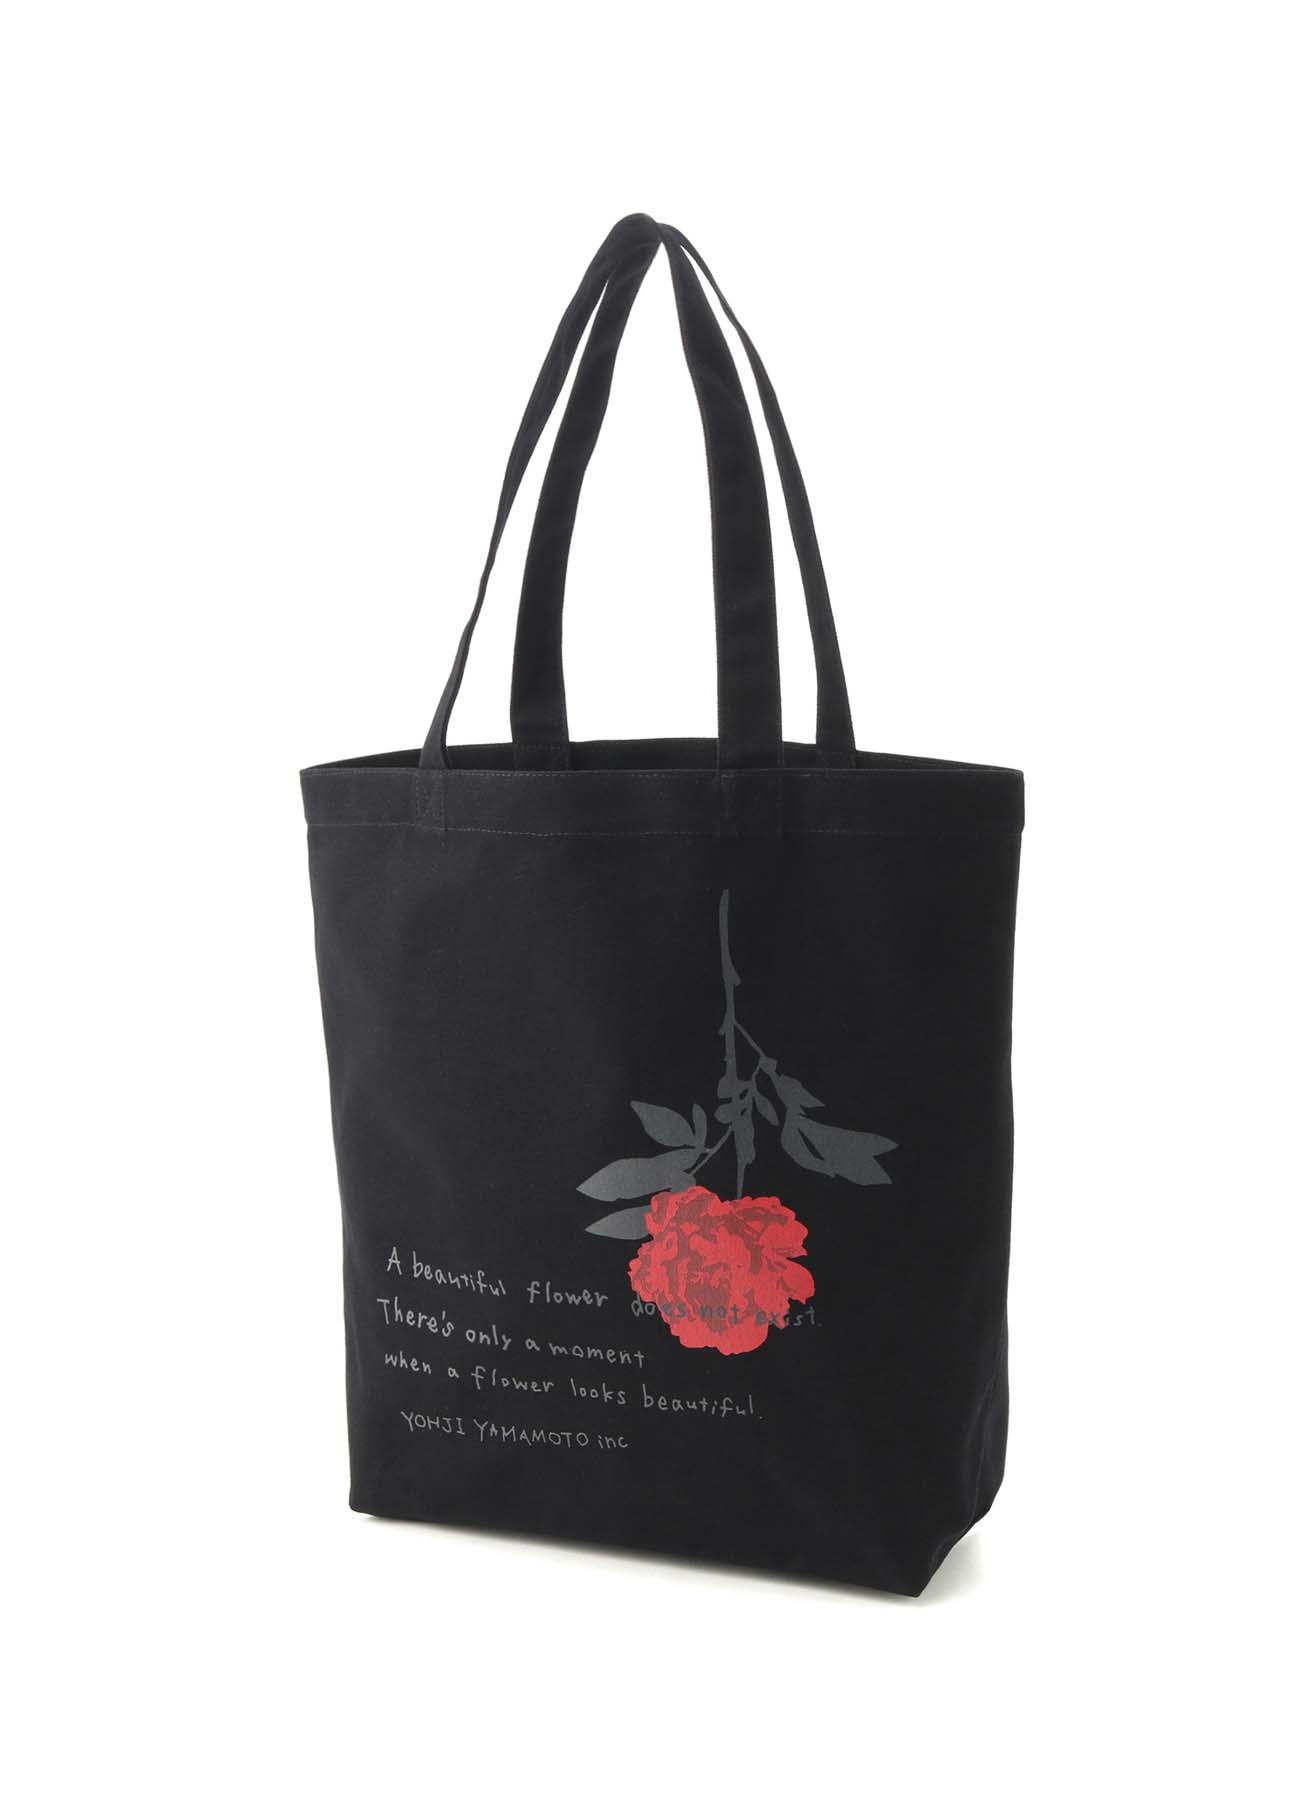 Moment When a Flower Looks Beautiful Tote